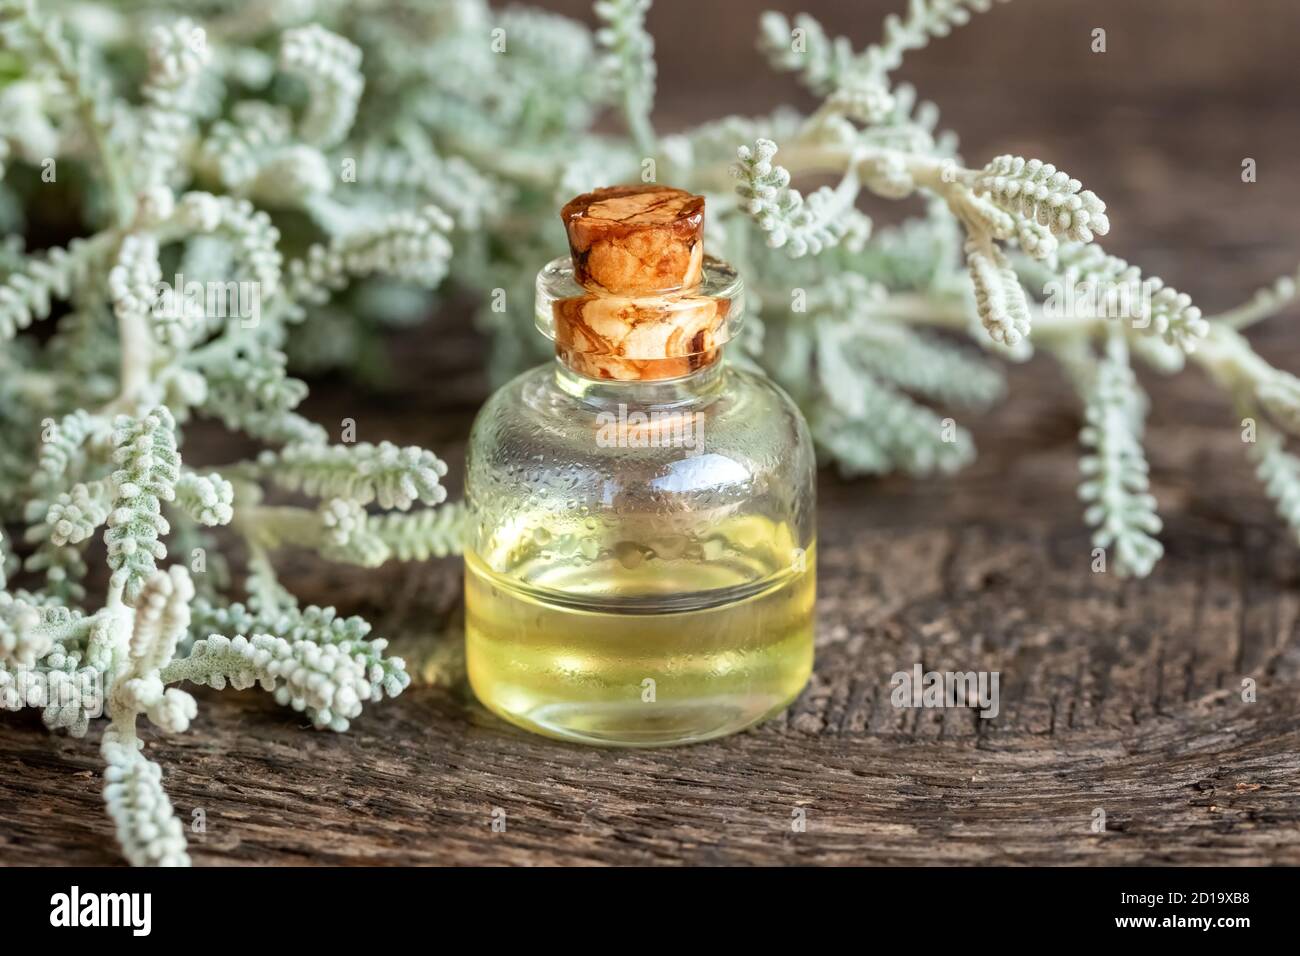 A bottle of essential oil with fresh santolina plant Stock Photo